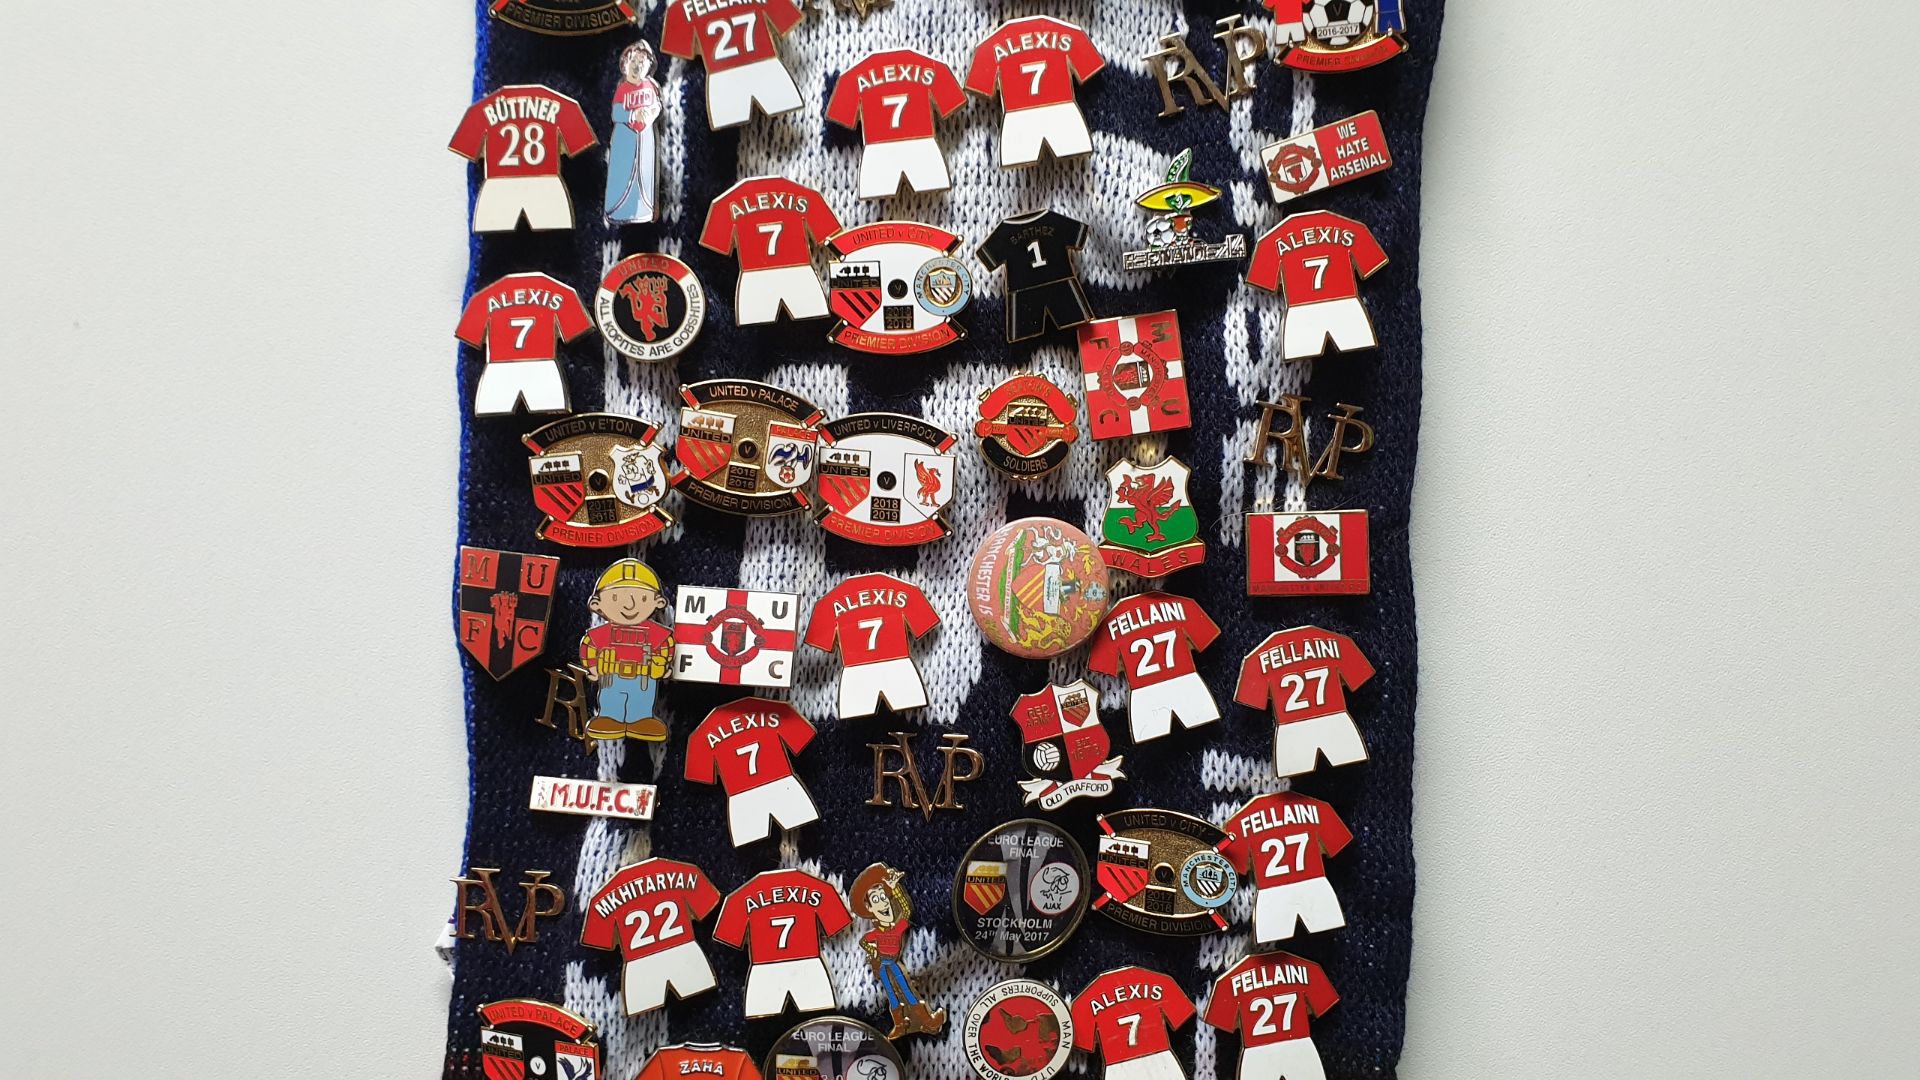 MANCHESTER UNITED SCARF CONTAINING APPROX 220 X PIN BADGES IE MUFC, OLD TRAFFORD, WE HATE CITY, EURO - Image 5 of 8